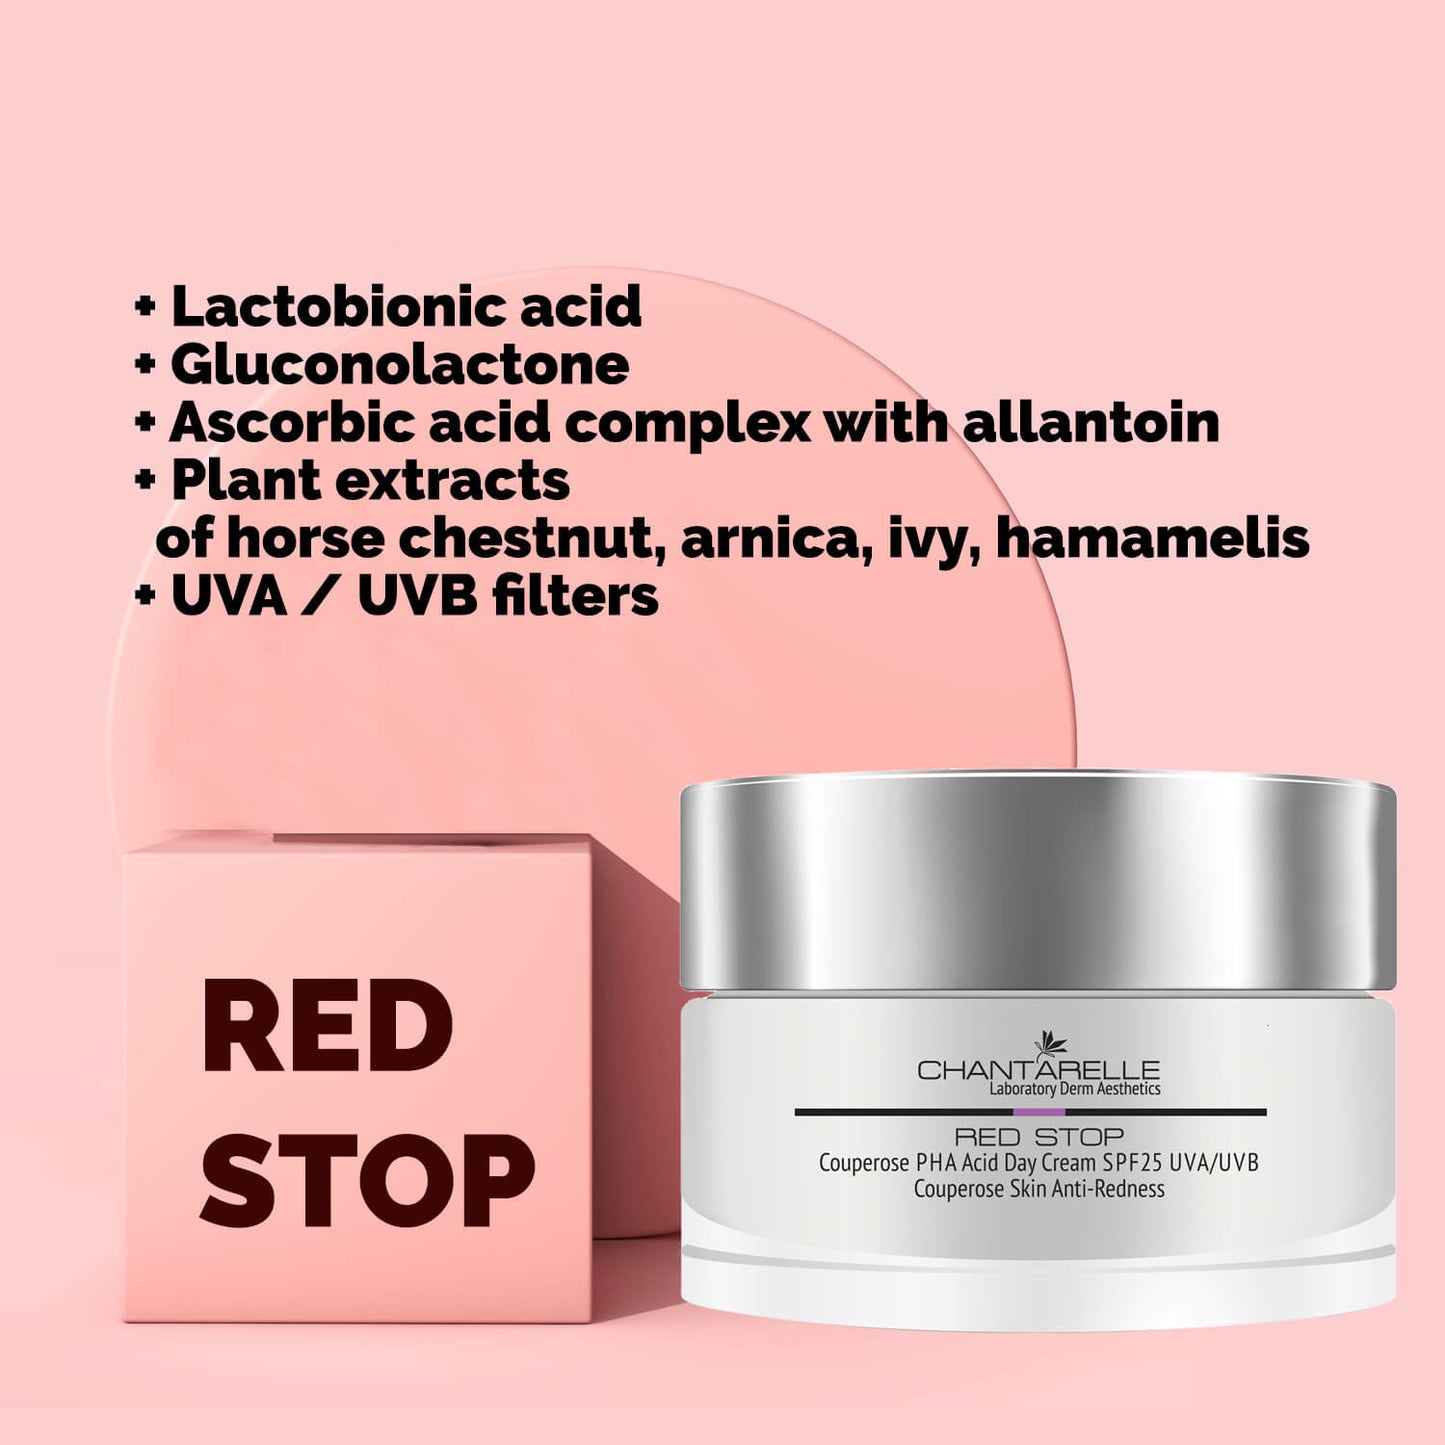 Red Stop Cuperose PHA Day Cream SPF25